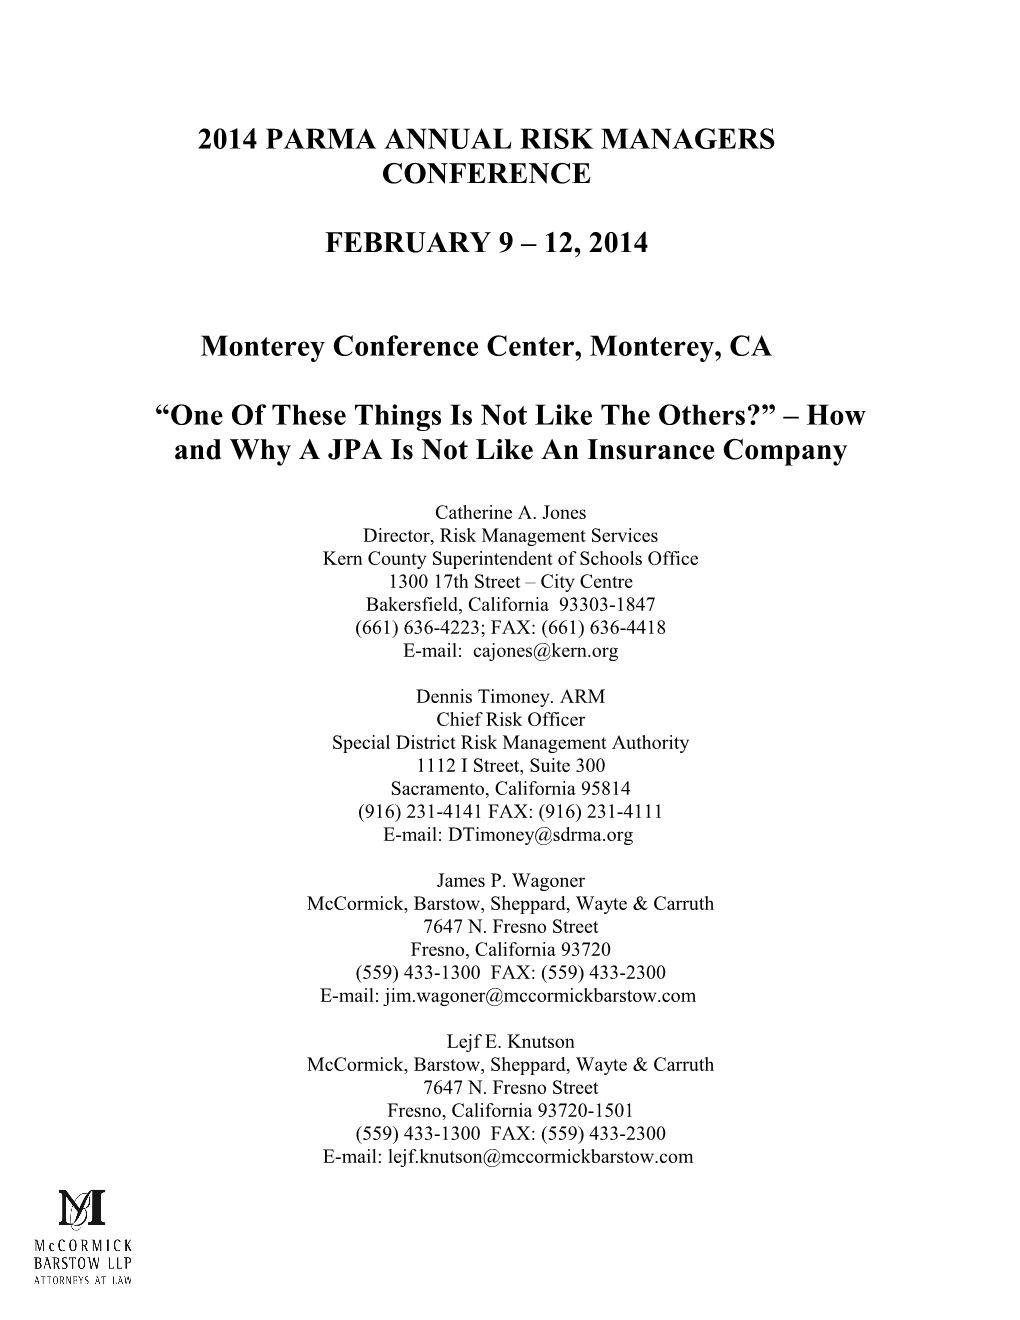 2014 Parma Annual Risk Managers Conference